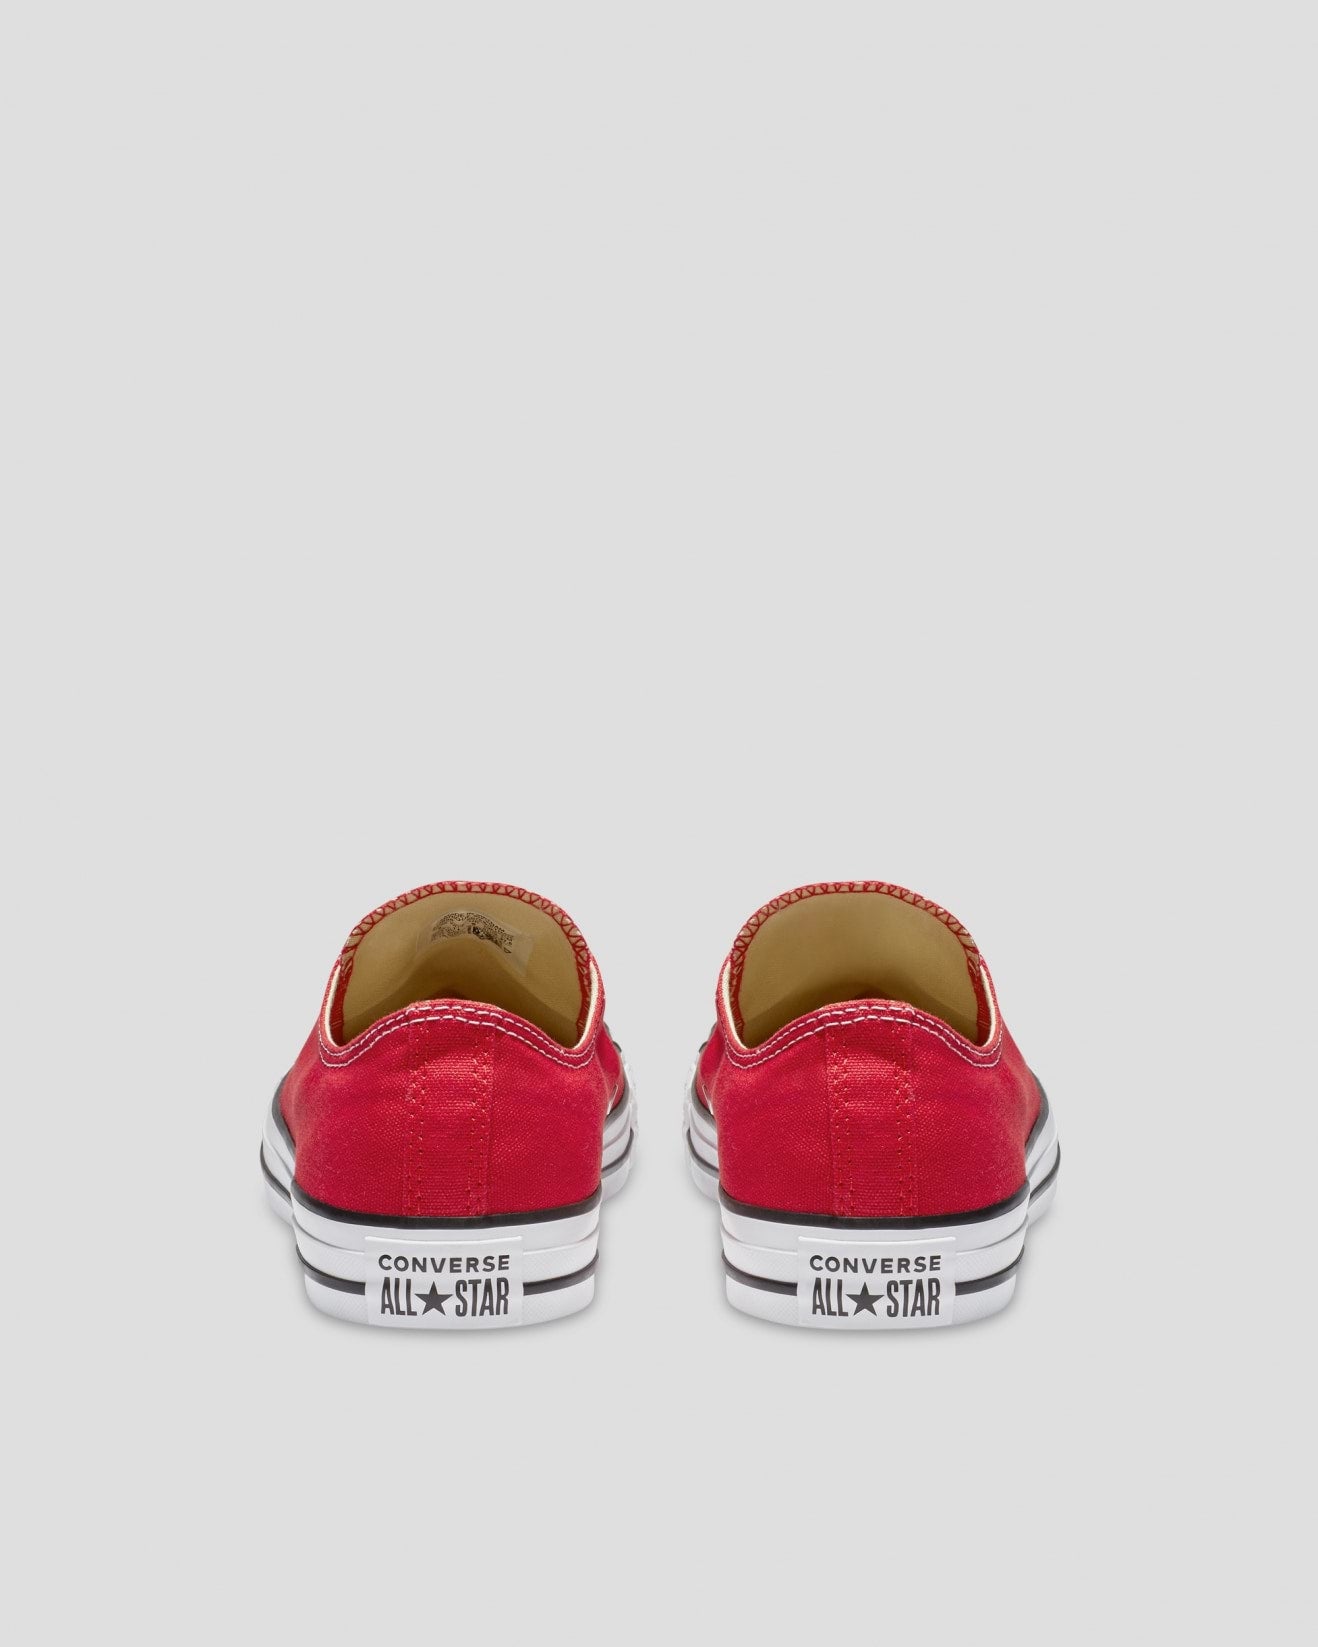 CONVERSE Chuck Taylor All Star Low Shoe - Red - VENUE.